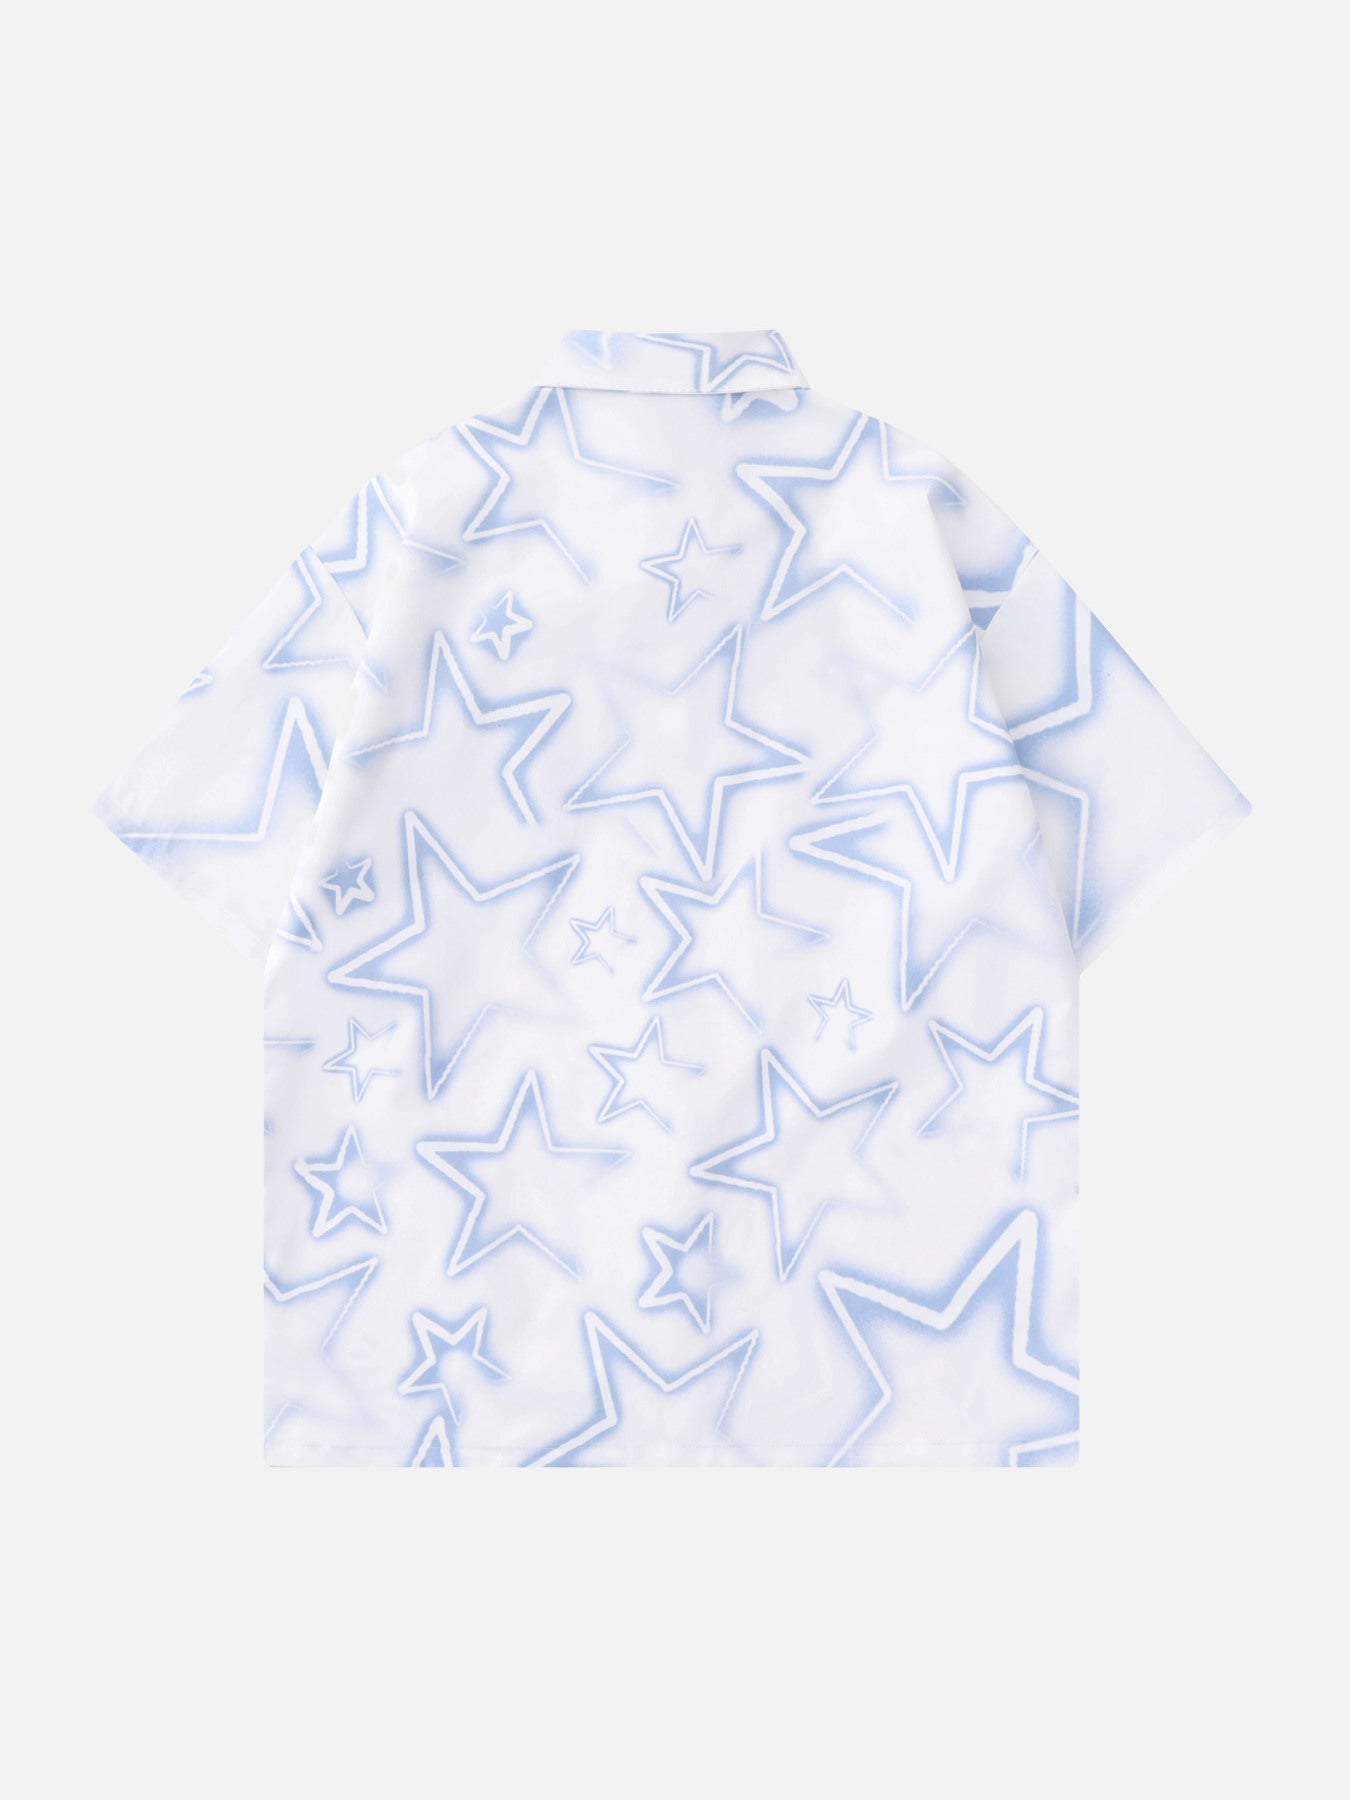 Thesupermade Chain Decorated Star Shirt